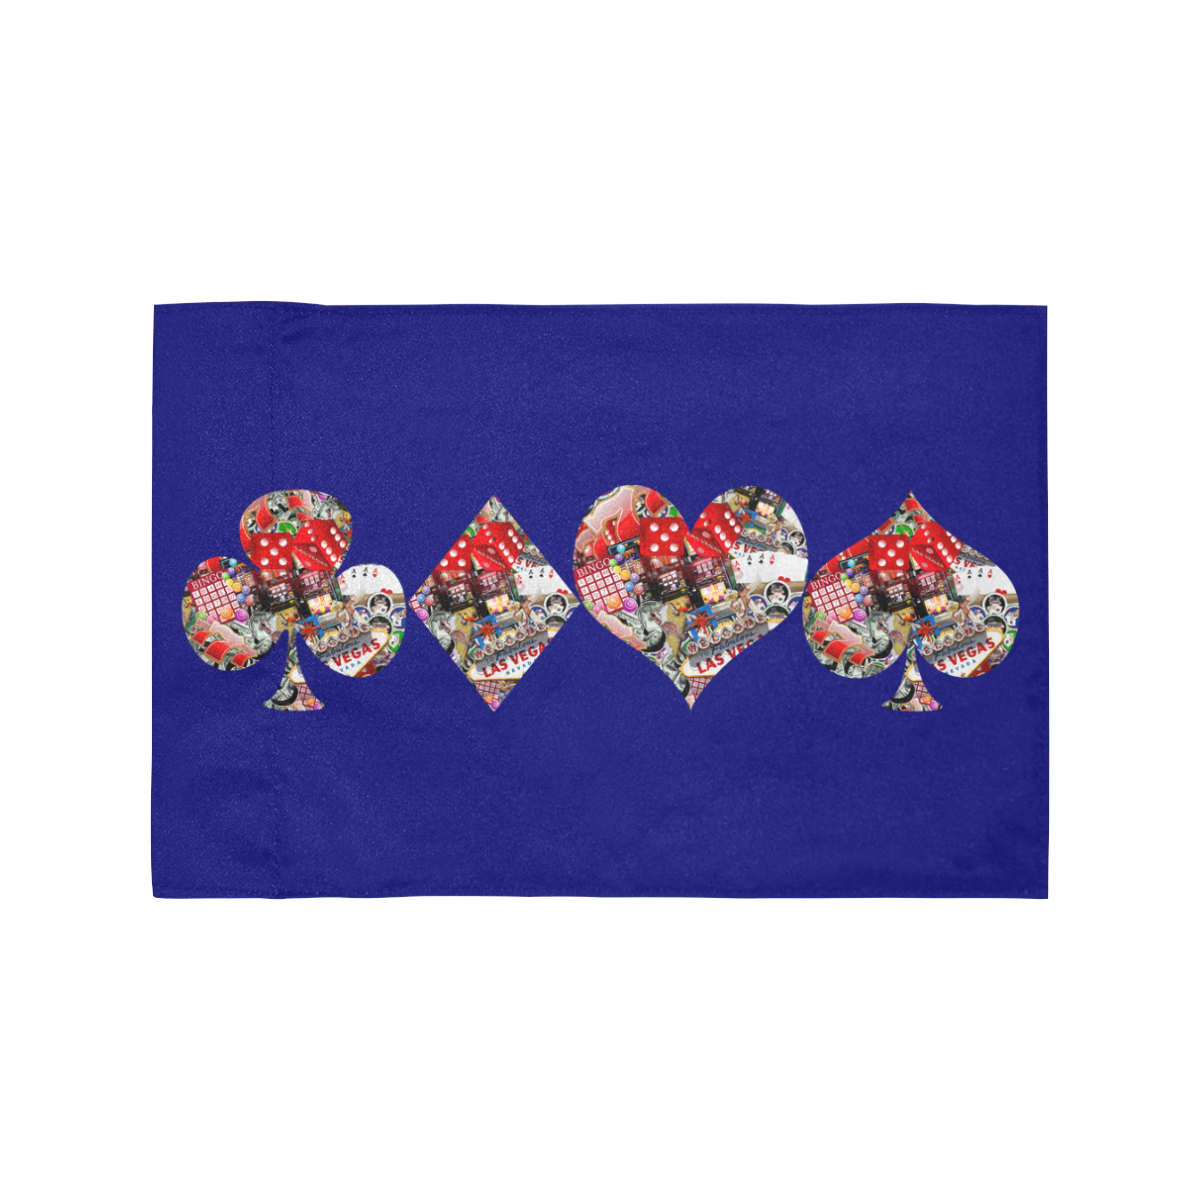 Las Vegas Playing Card Shapes / Blue Motorcycle Flag (Twin Sides)